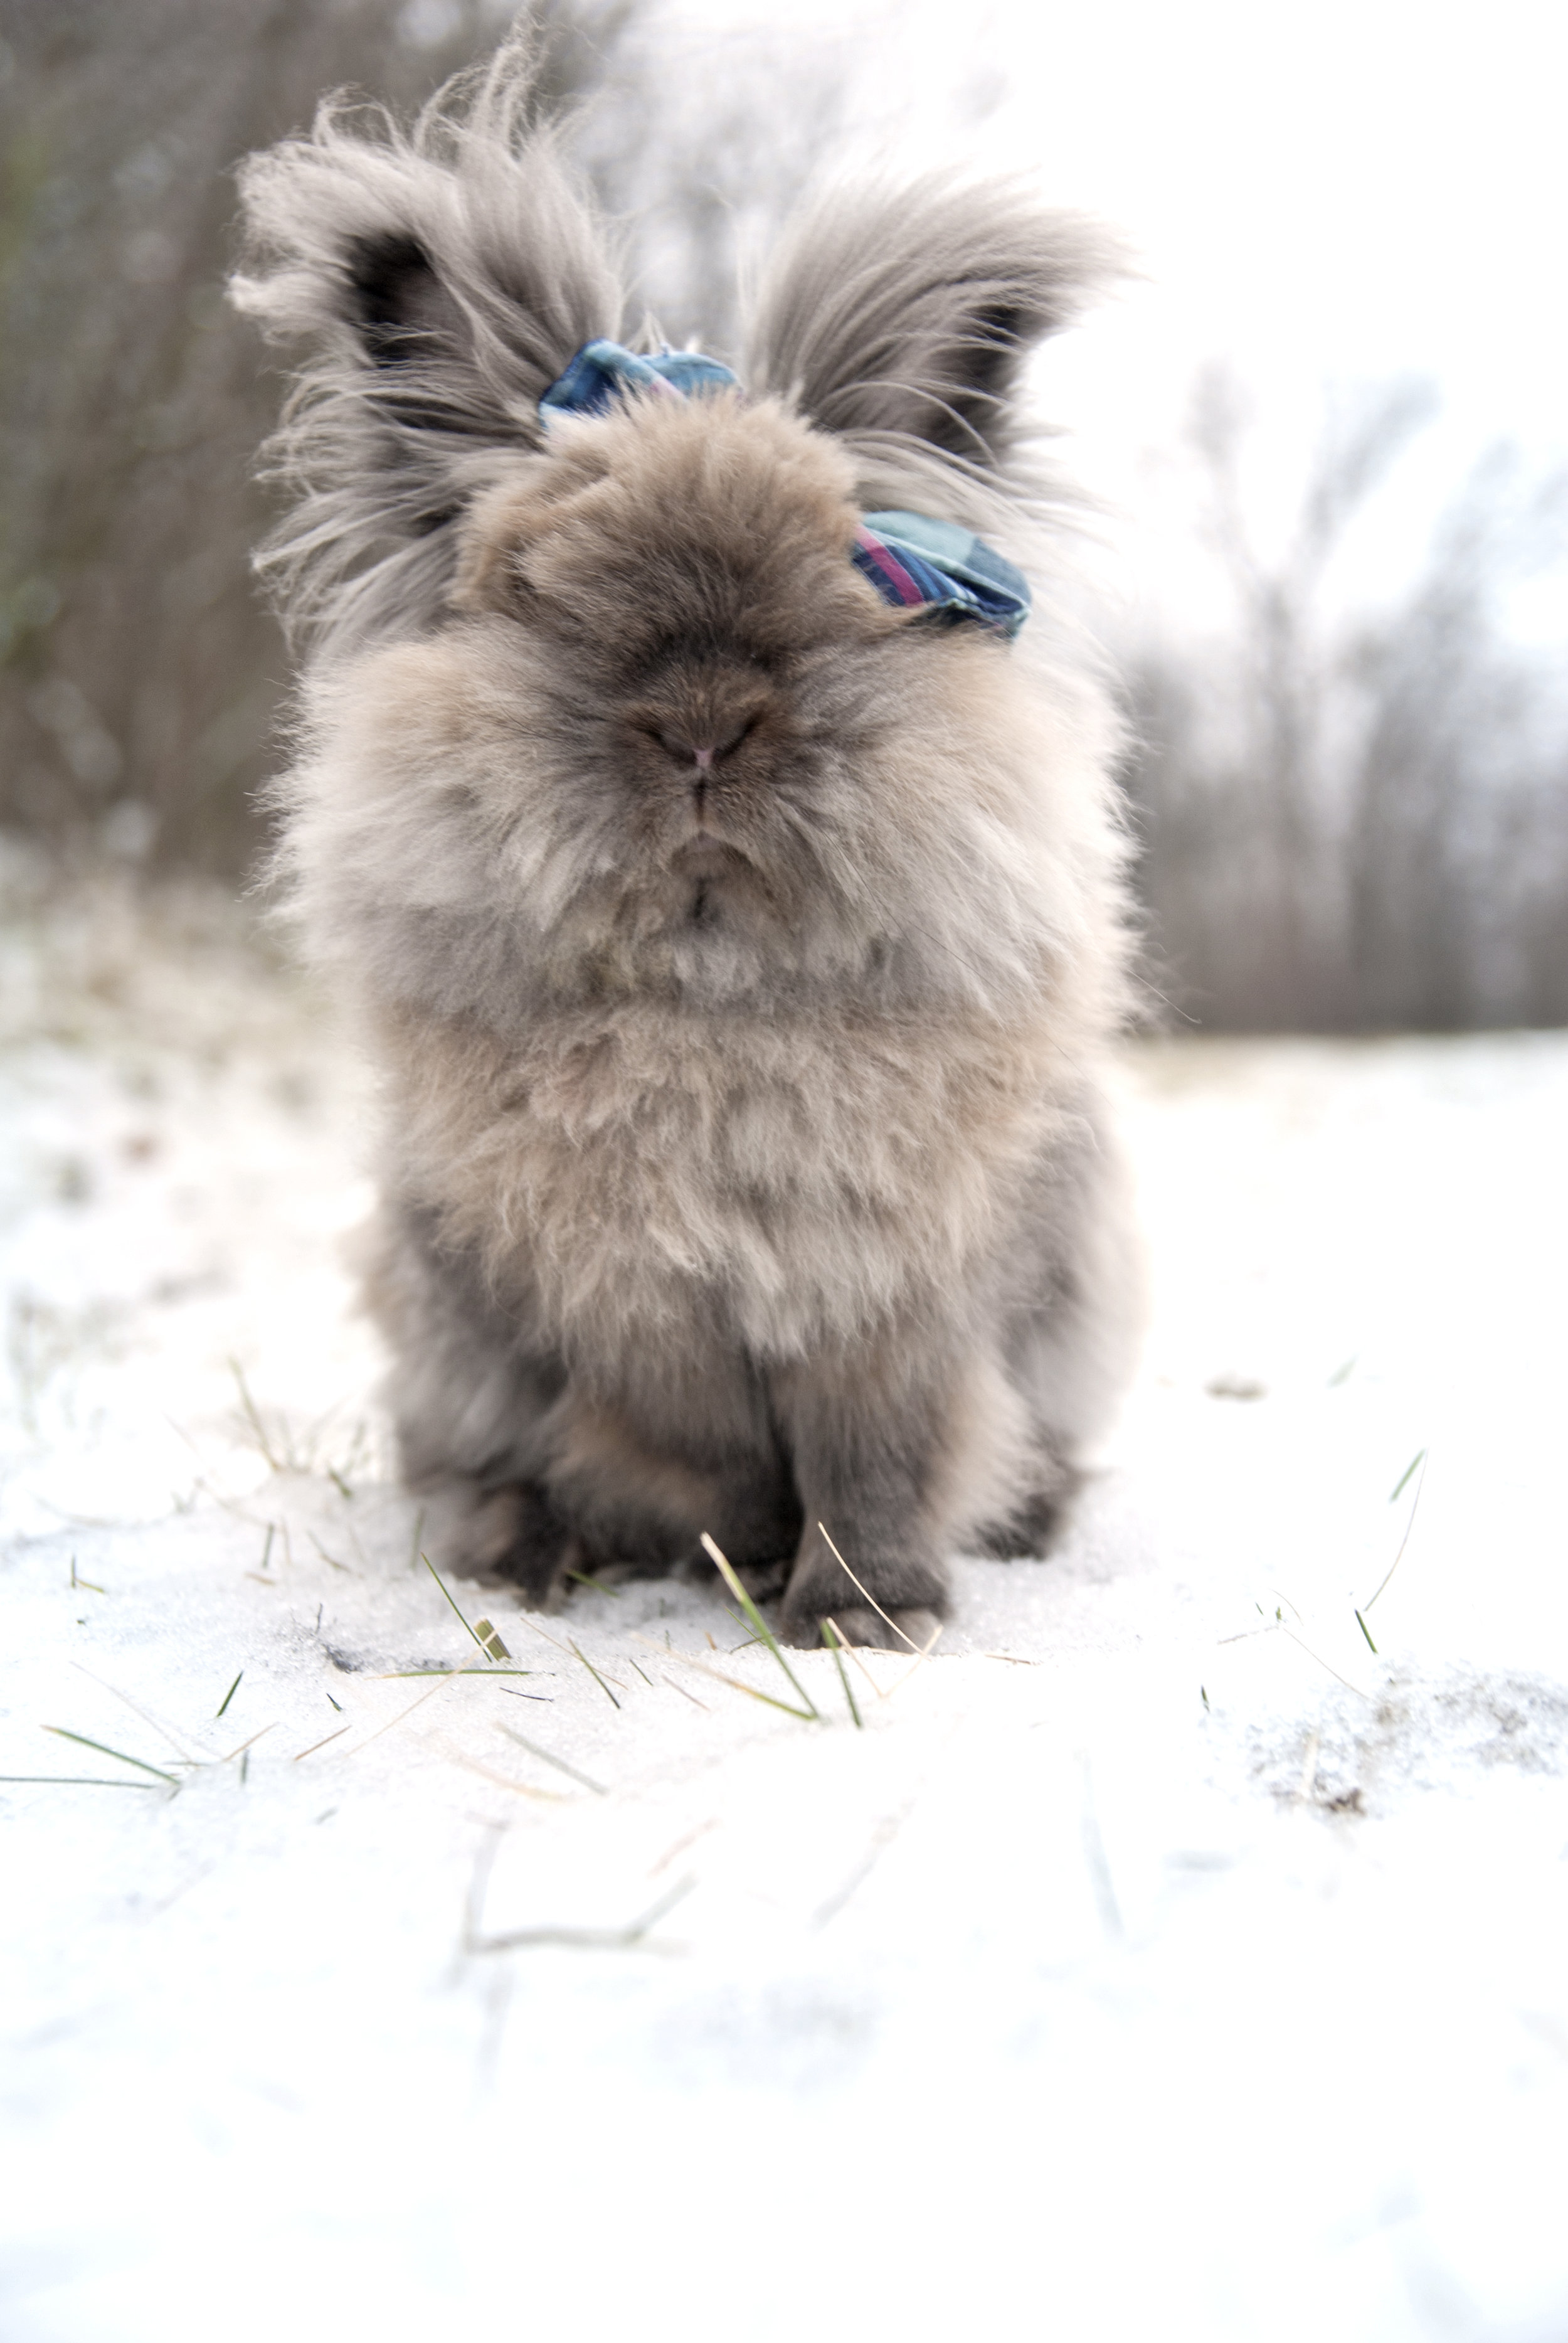 Bunny Has Lots of Fur to Keep Her Warm in the Snow 1